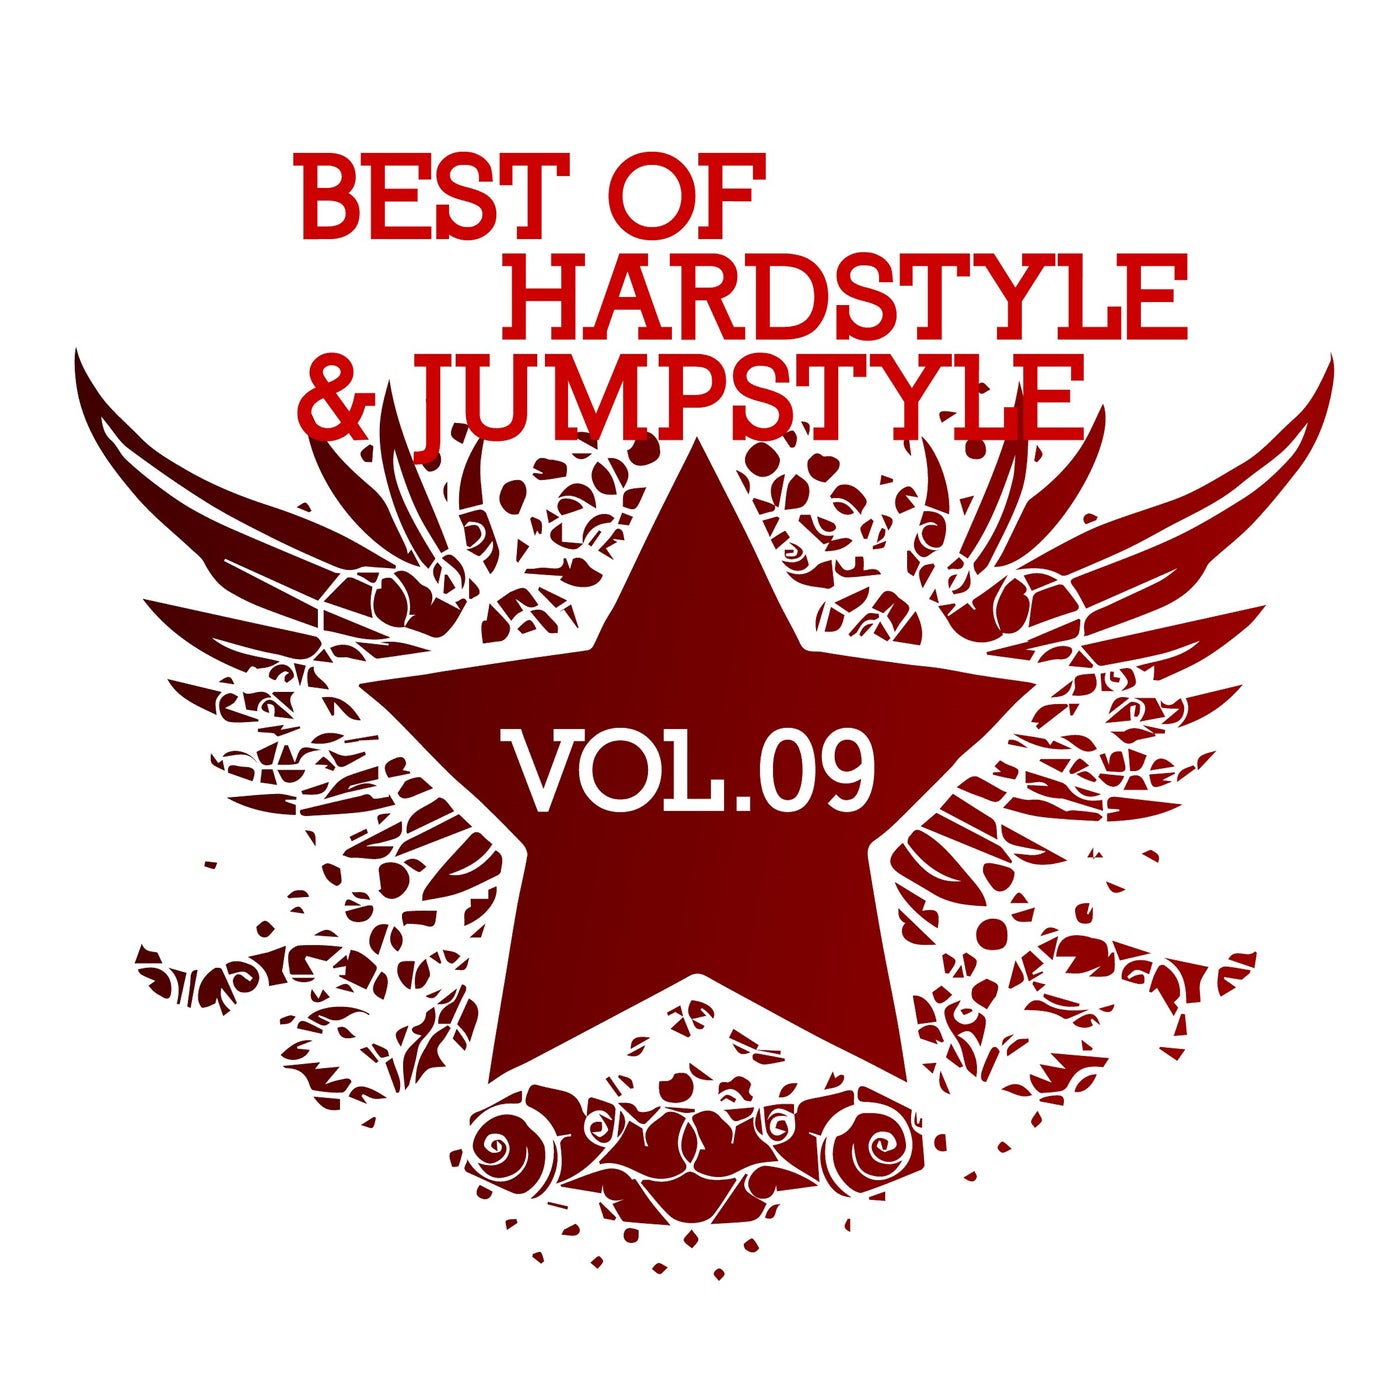 Best of Hardstyle & Jumpstyle, Vol. 09